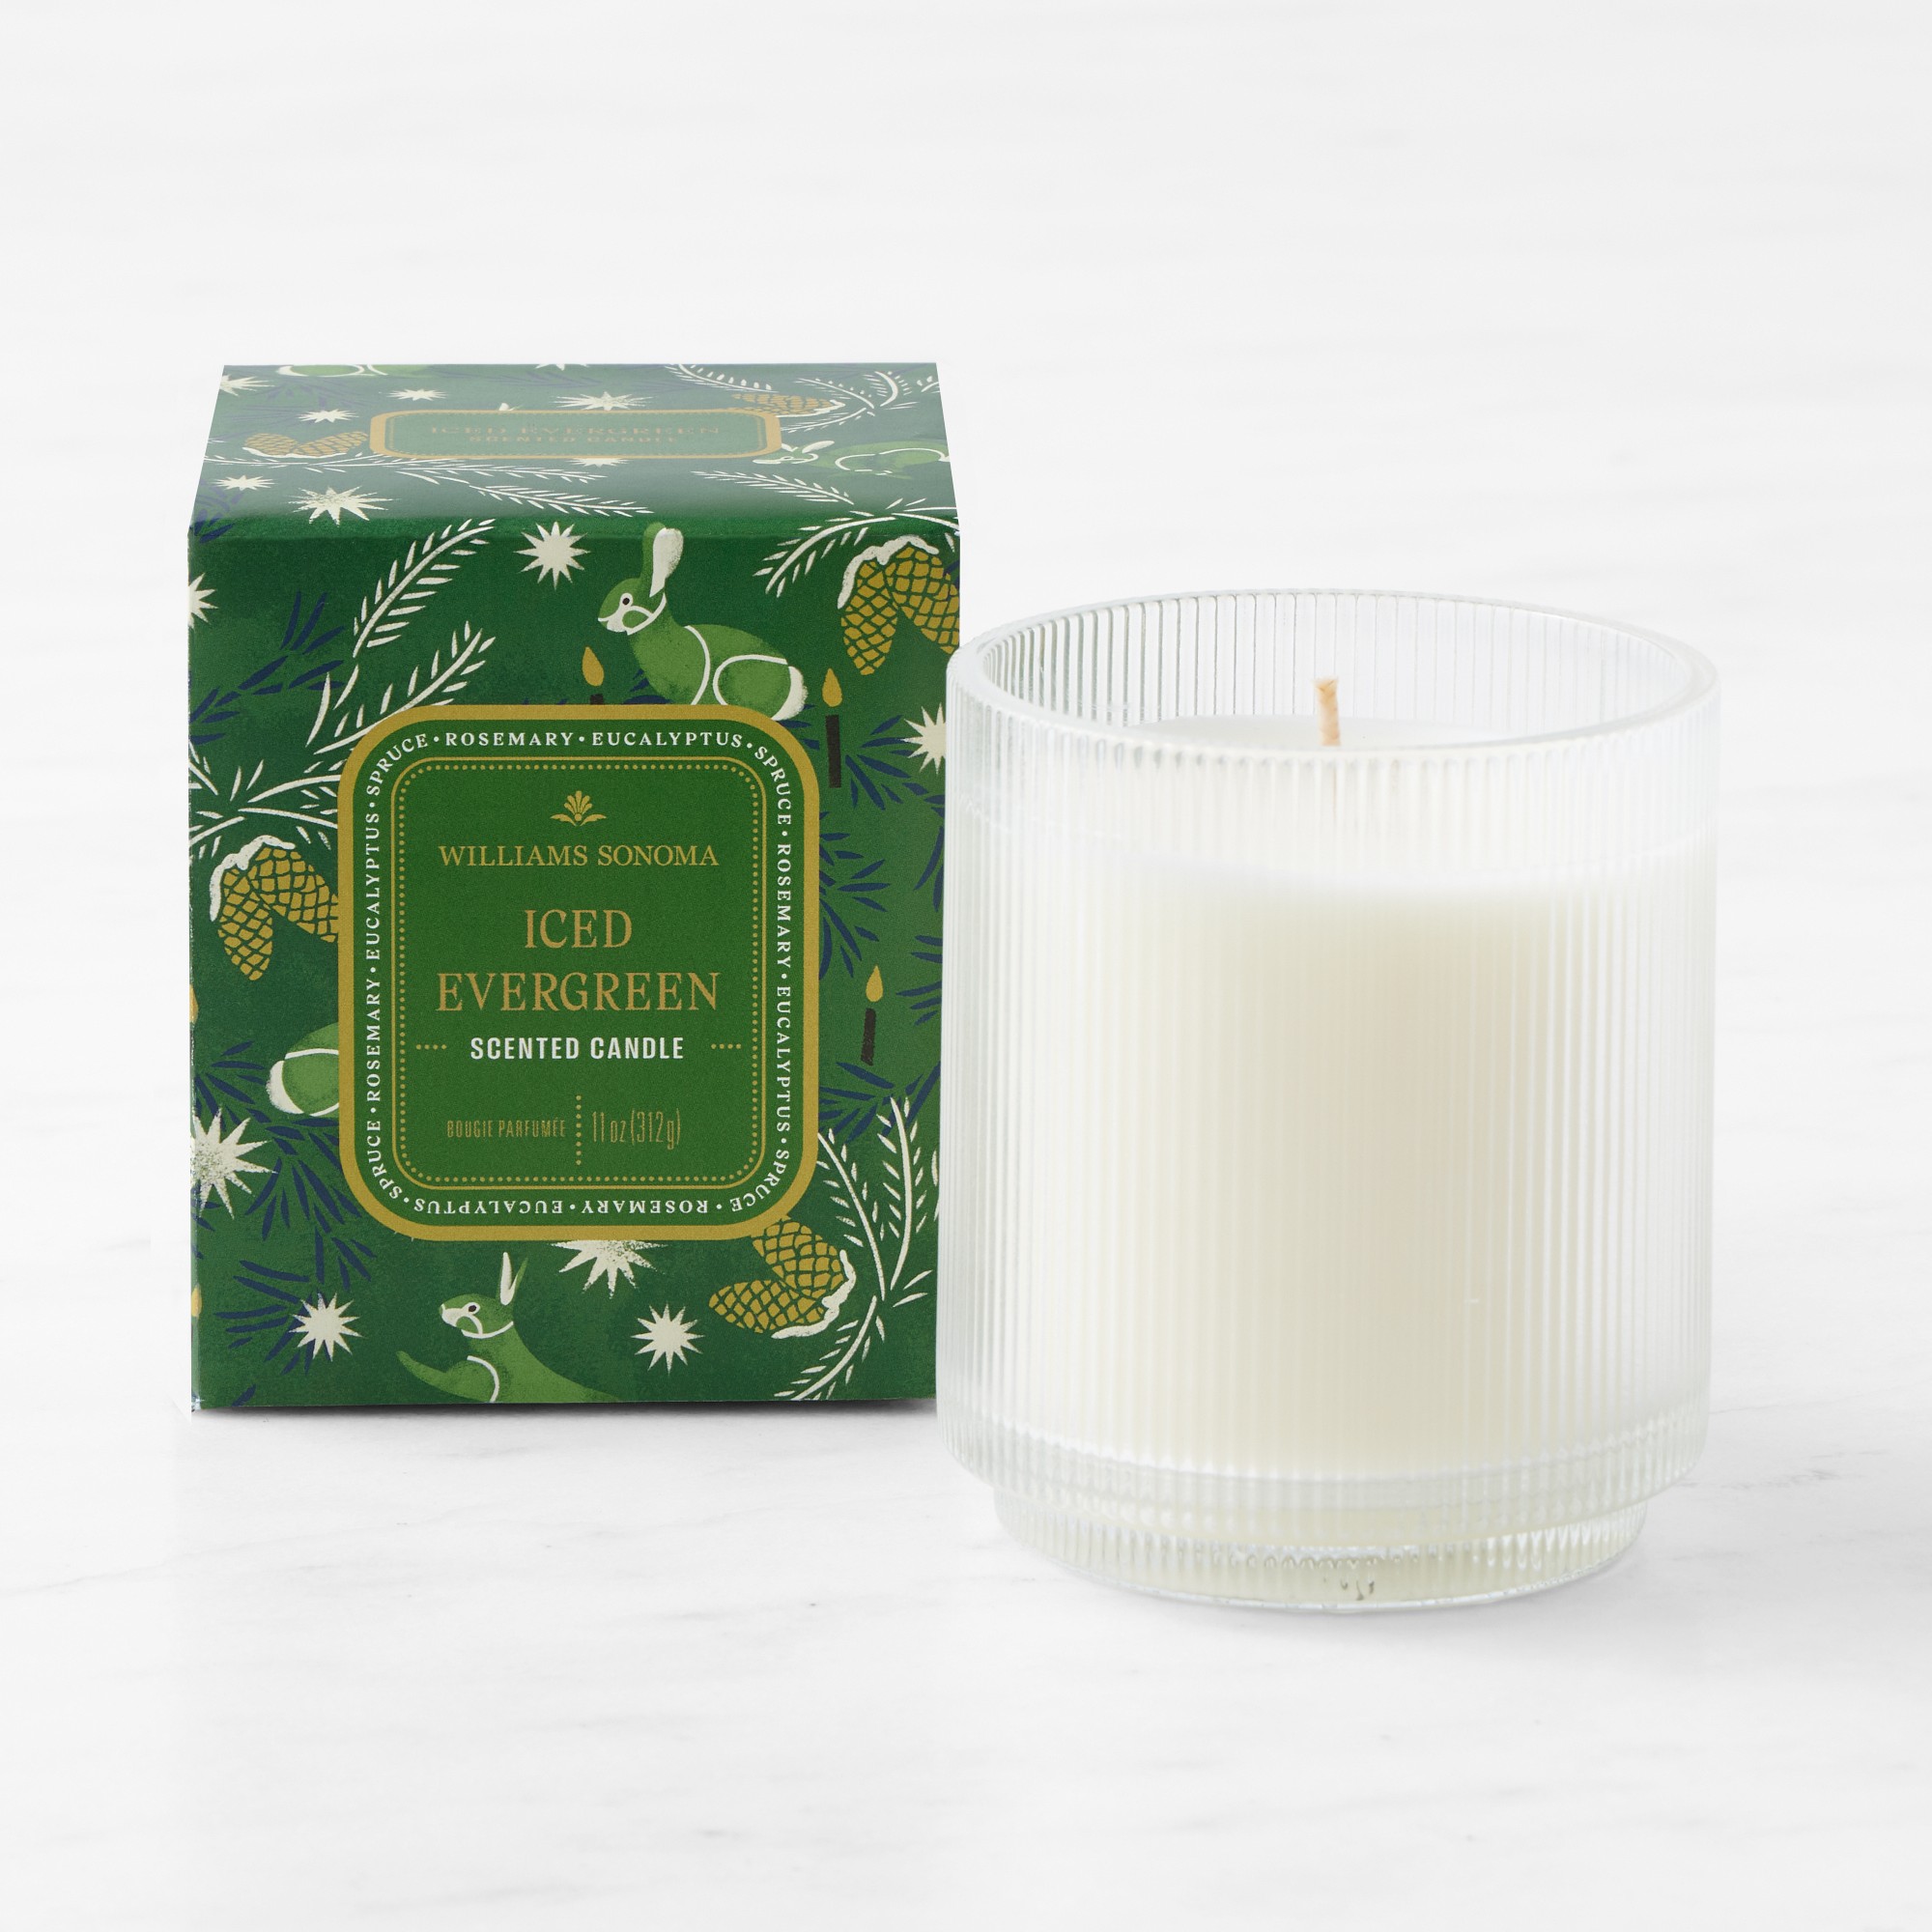 Through The Woods Iced Evergreen Candle